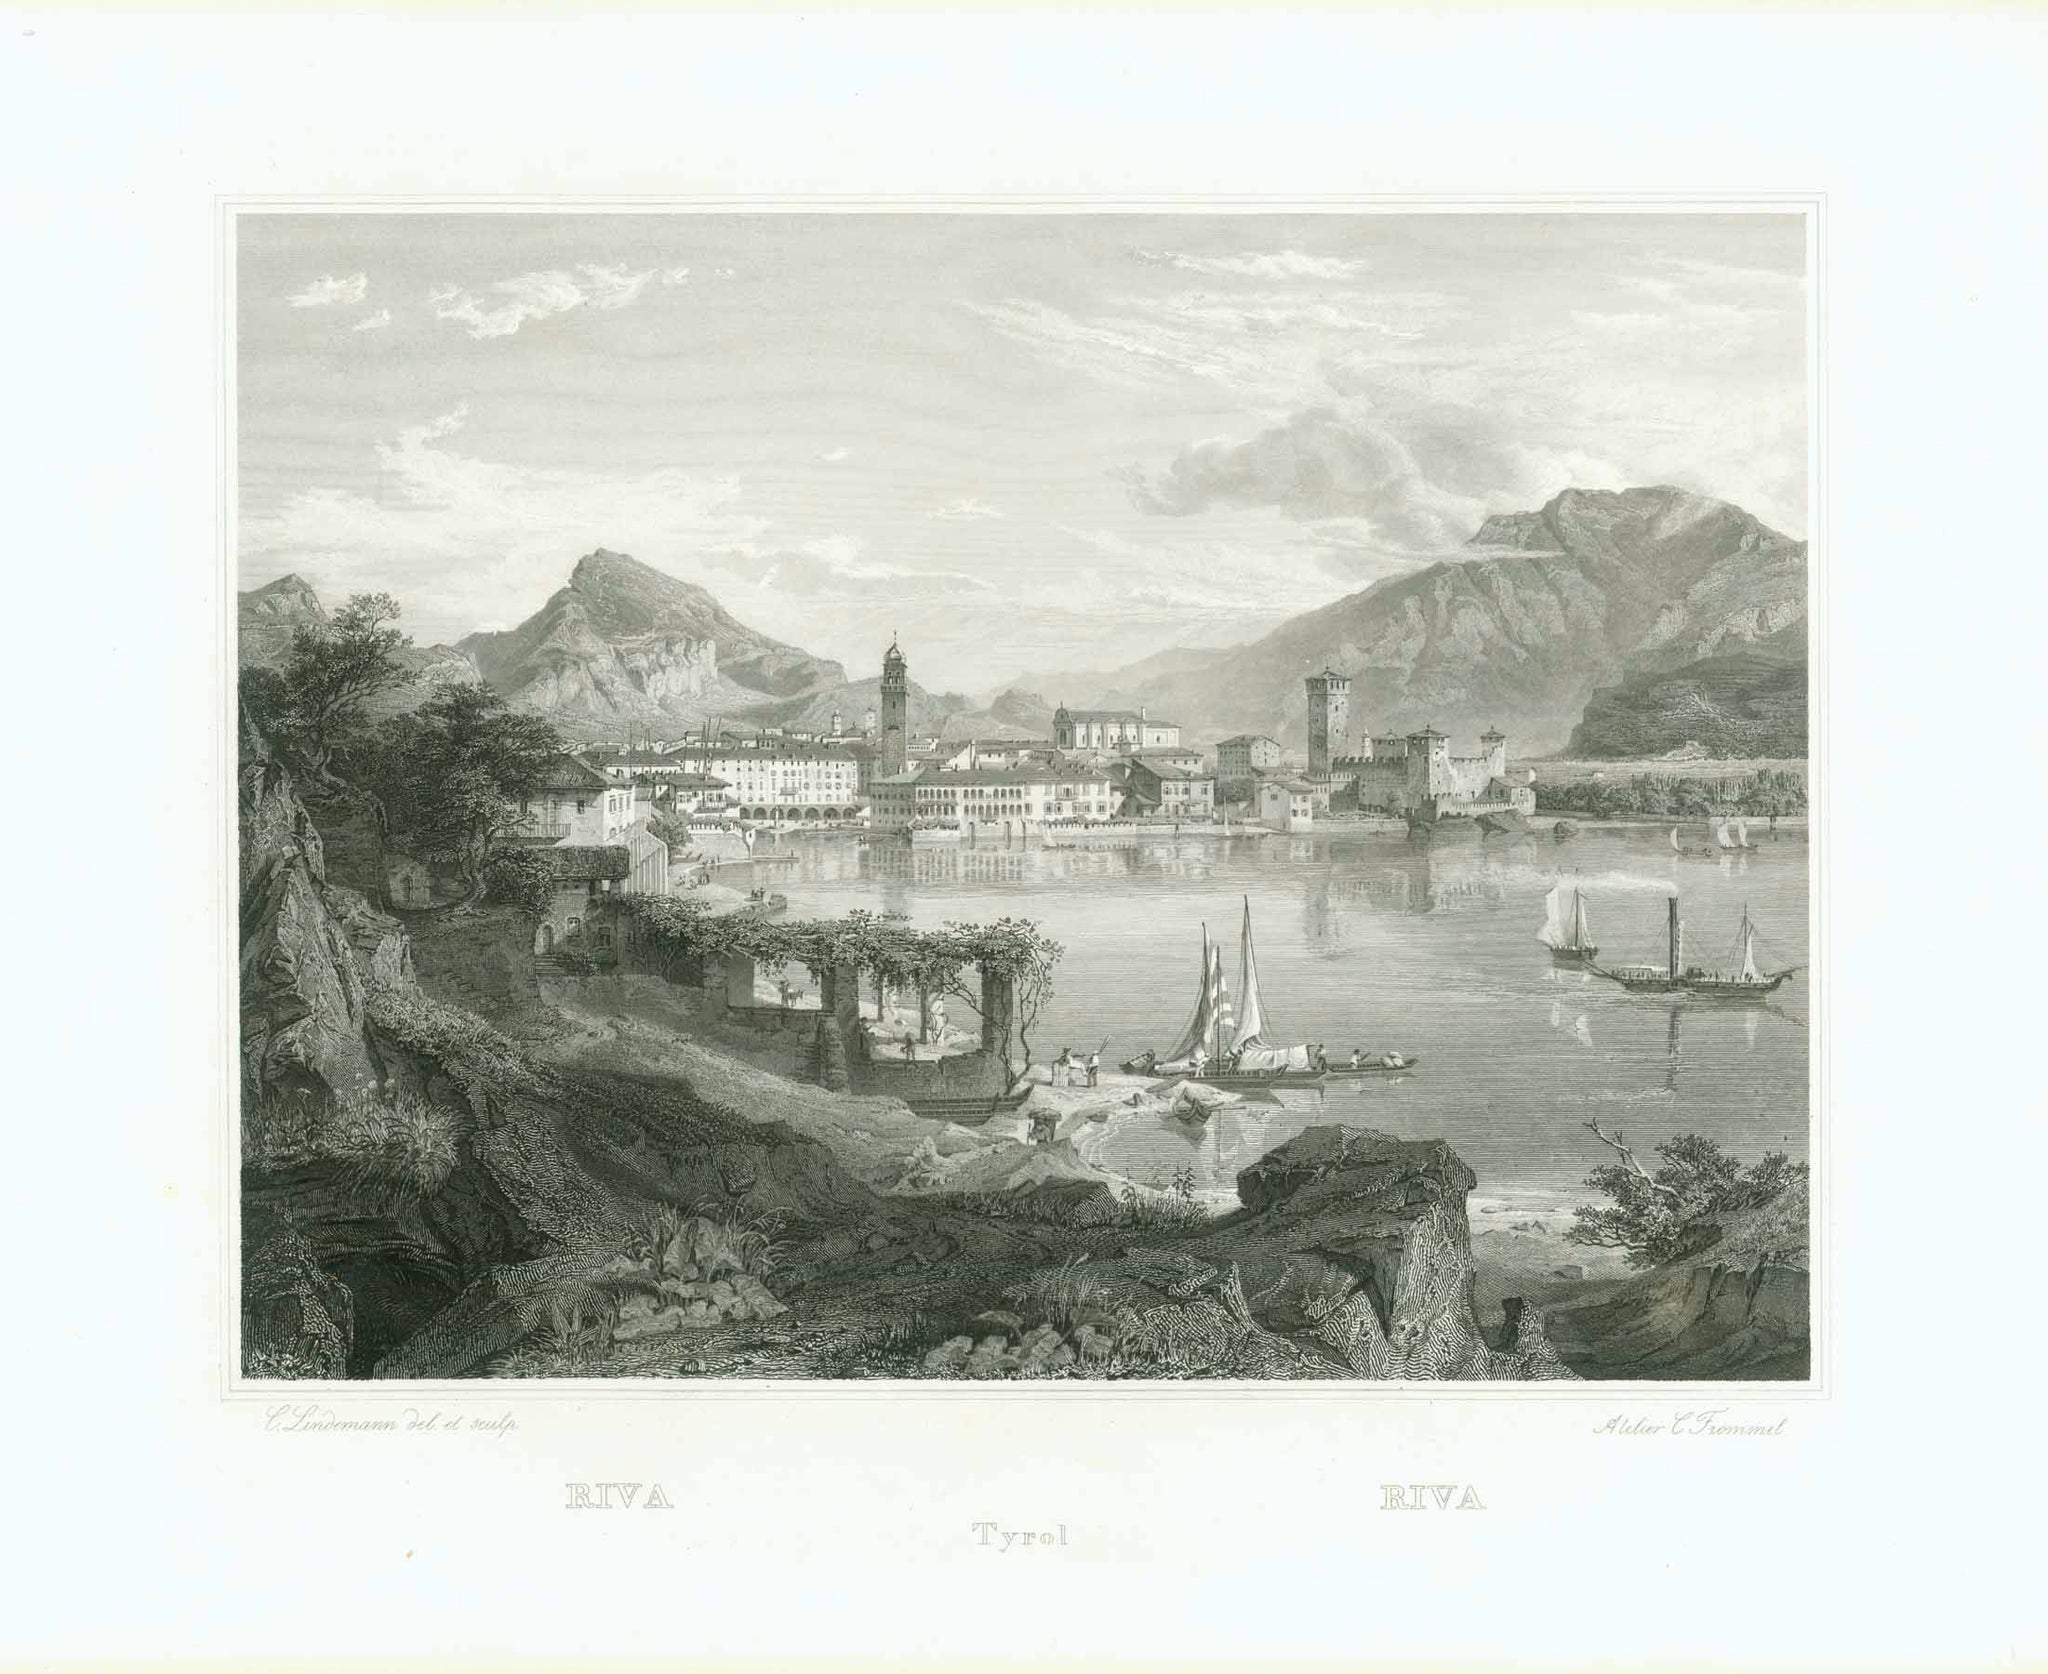 "Riva"  "Tyrol"  Exceptional steel engraving of Riva by C. Lindermann, 1842.  The print is from "Tyrol und seine naechste Umgebungen" by C. Frommel.  Original antique print , interior design, wall decoration, ideas, idea, gift ideas, present, vintage, charming, special, decoration, home interior, living room design